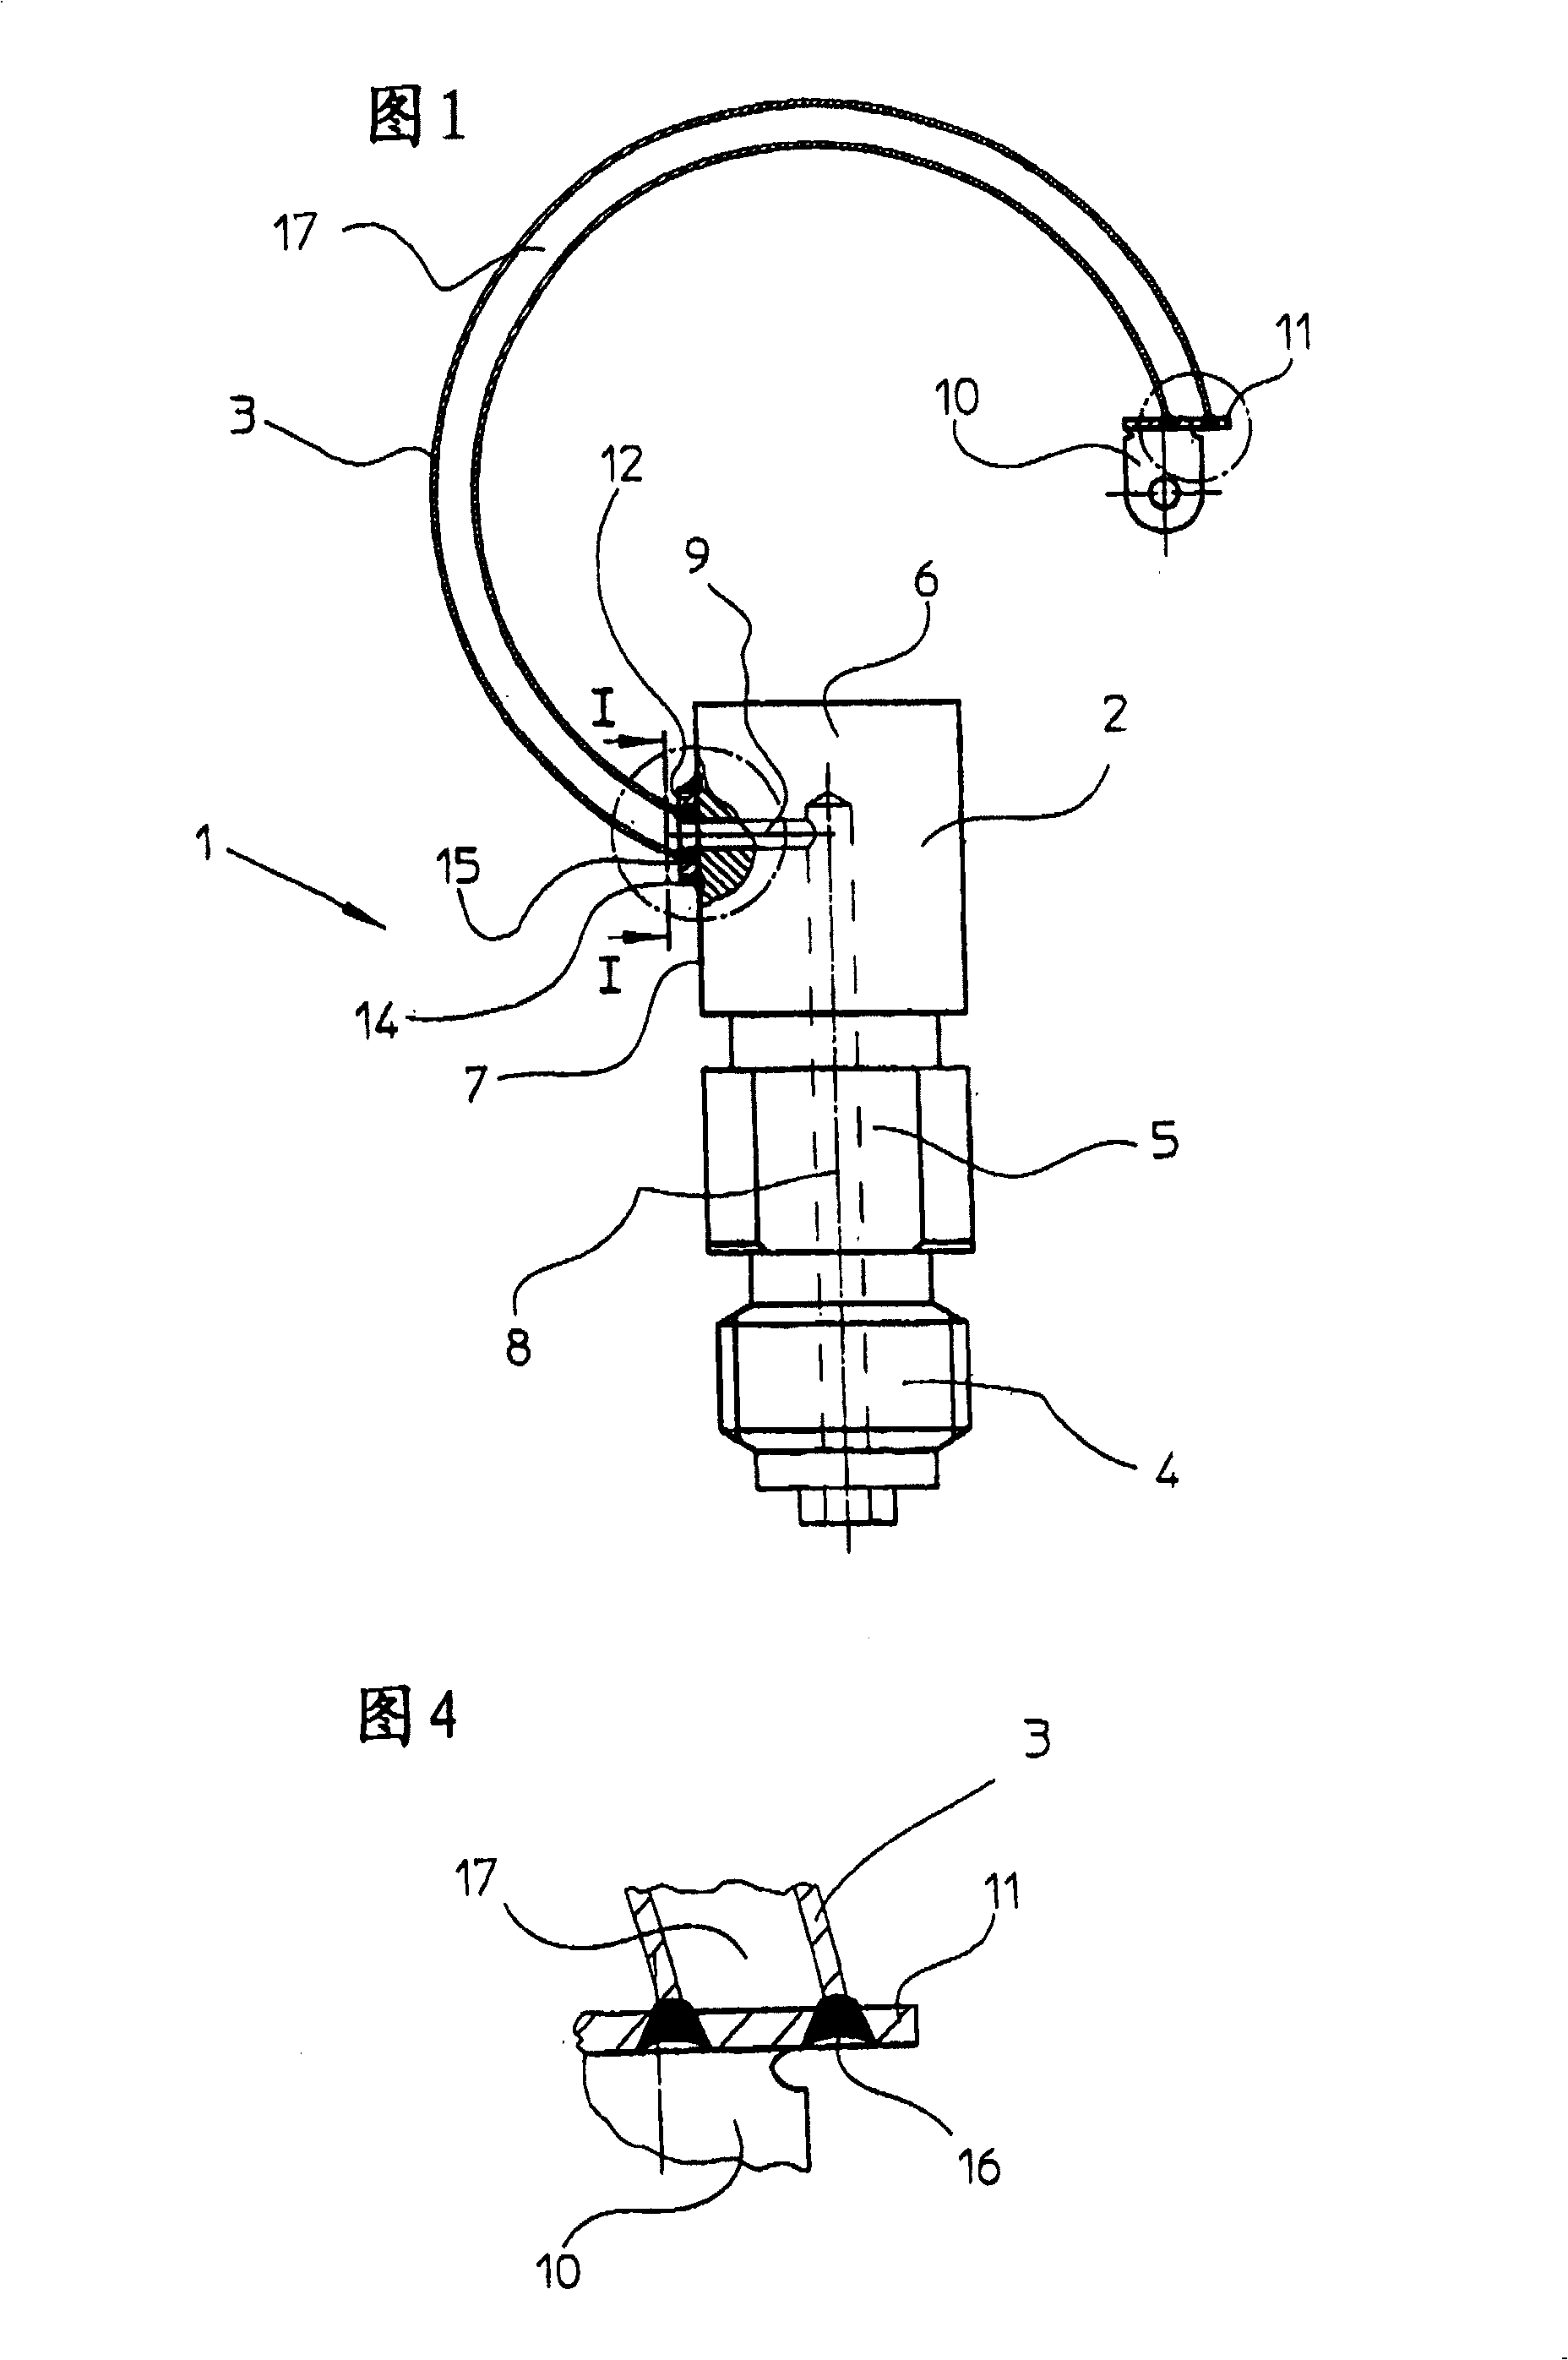 Spring-elastic measuring element comprising a flat connecting element that can be welded